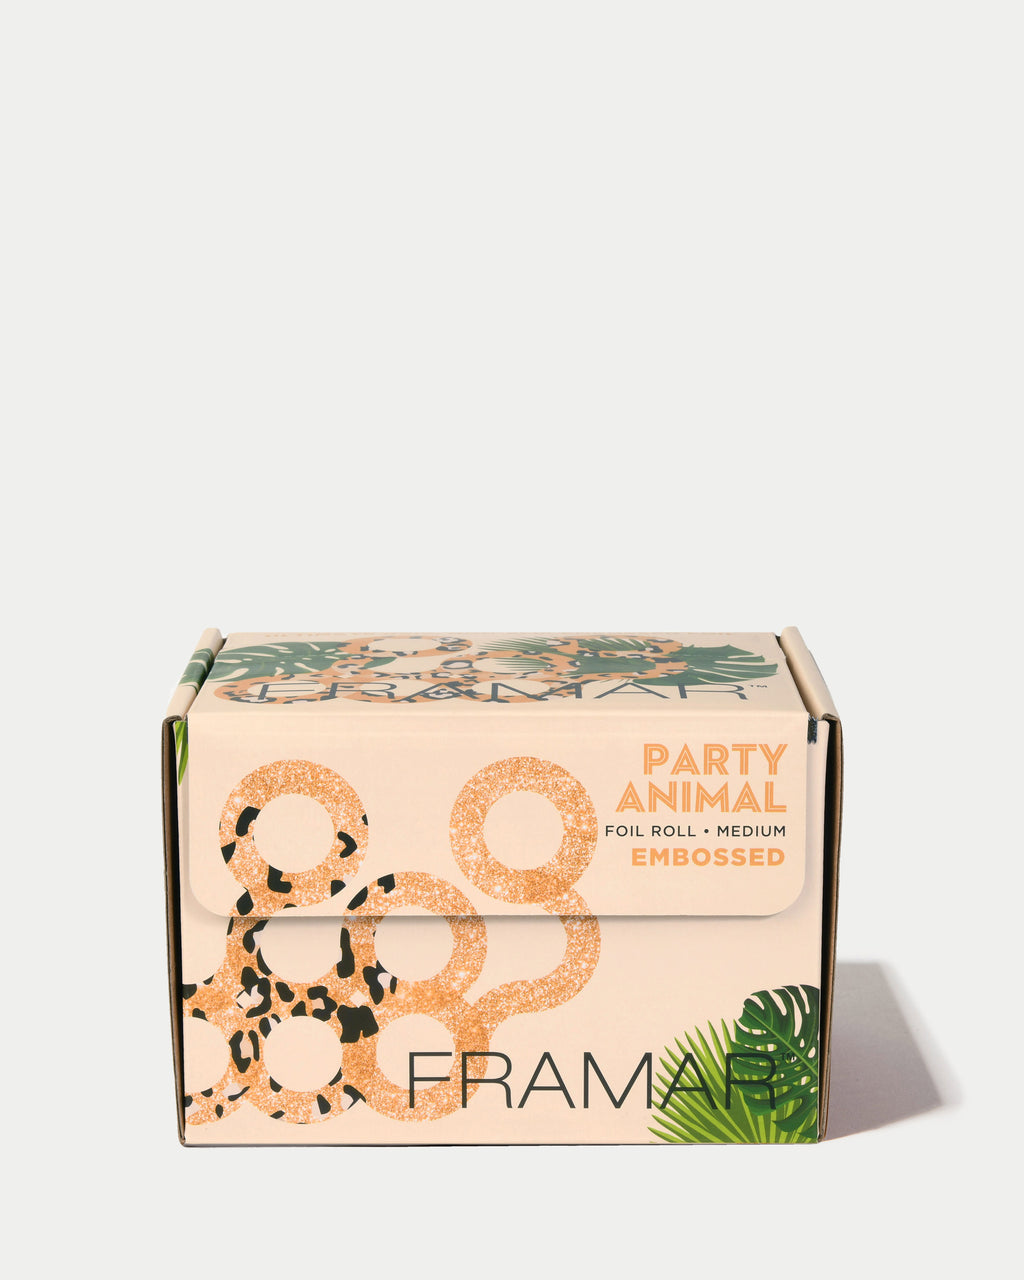 Framar Party Animal - Embossed Roll